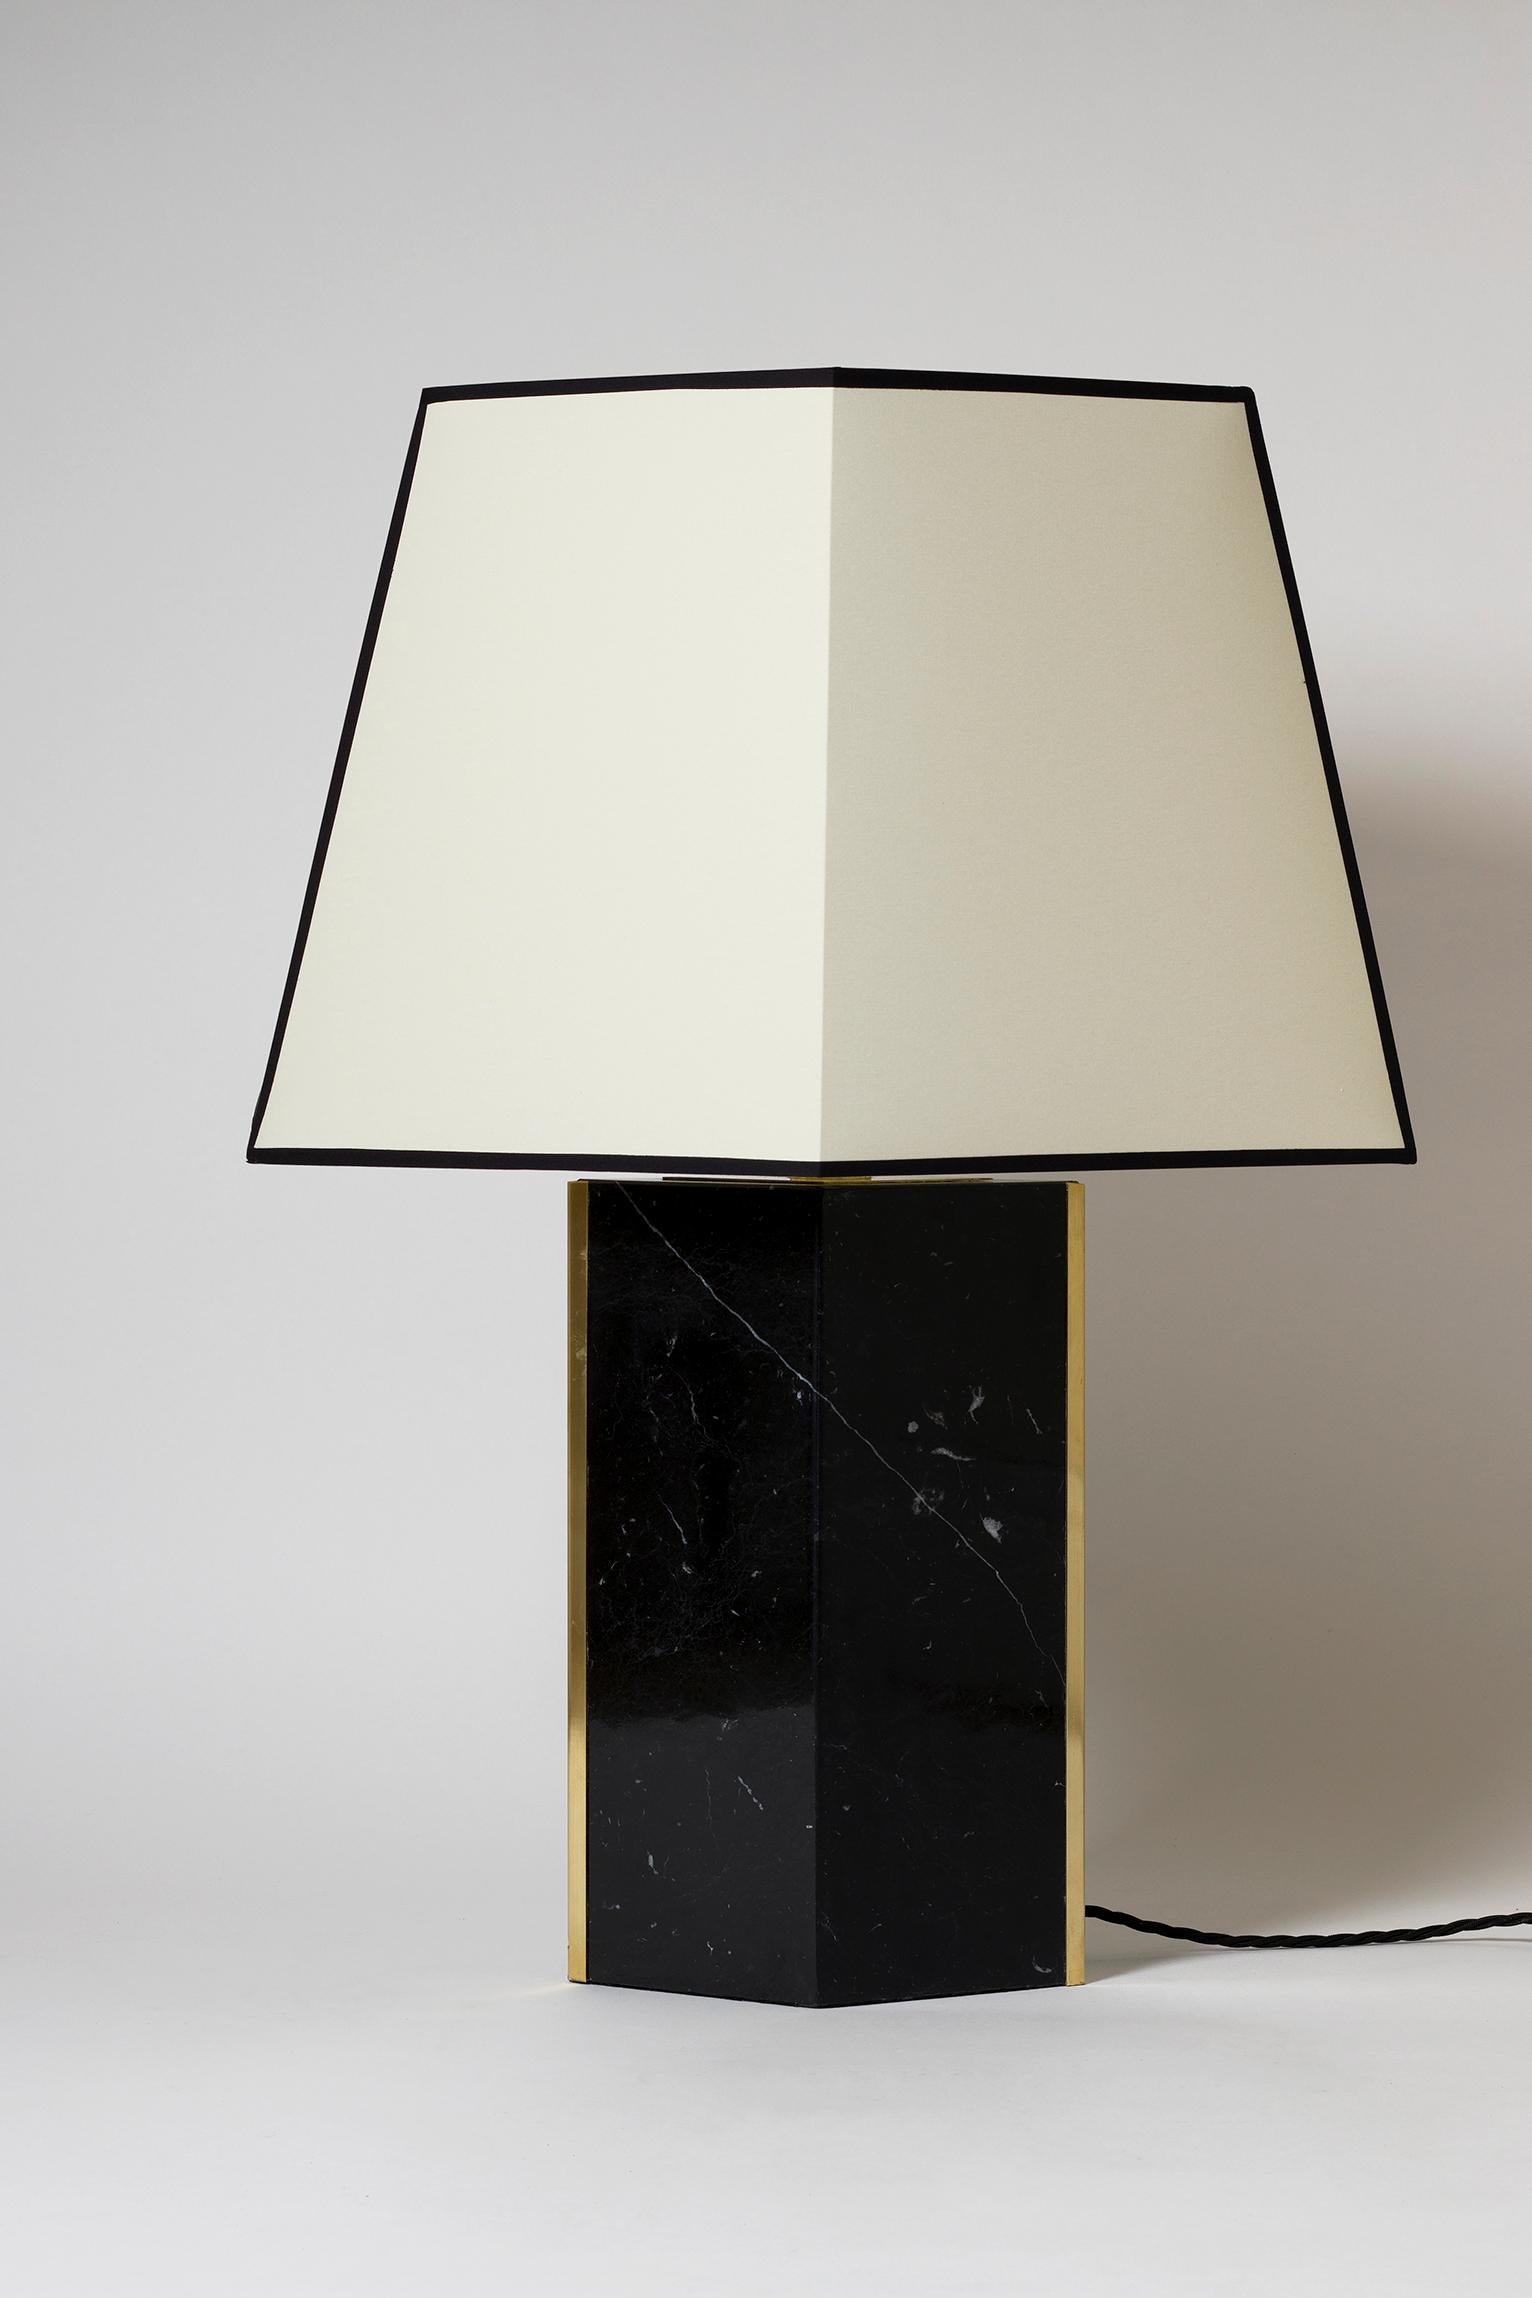 British Pair of Black Marble and Brass Table Lamp, by Dorian Caffot de Fawes